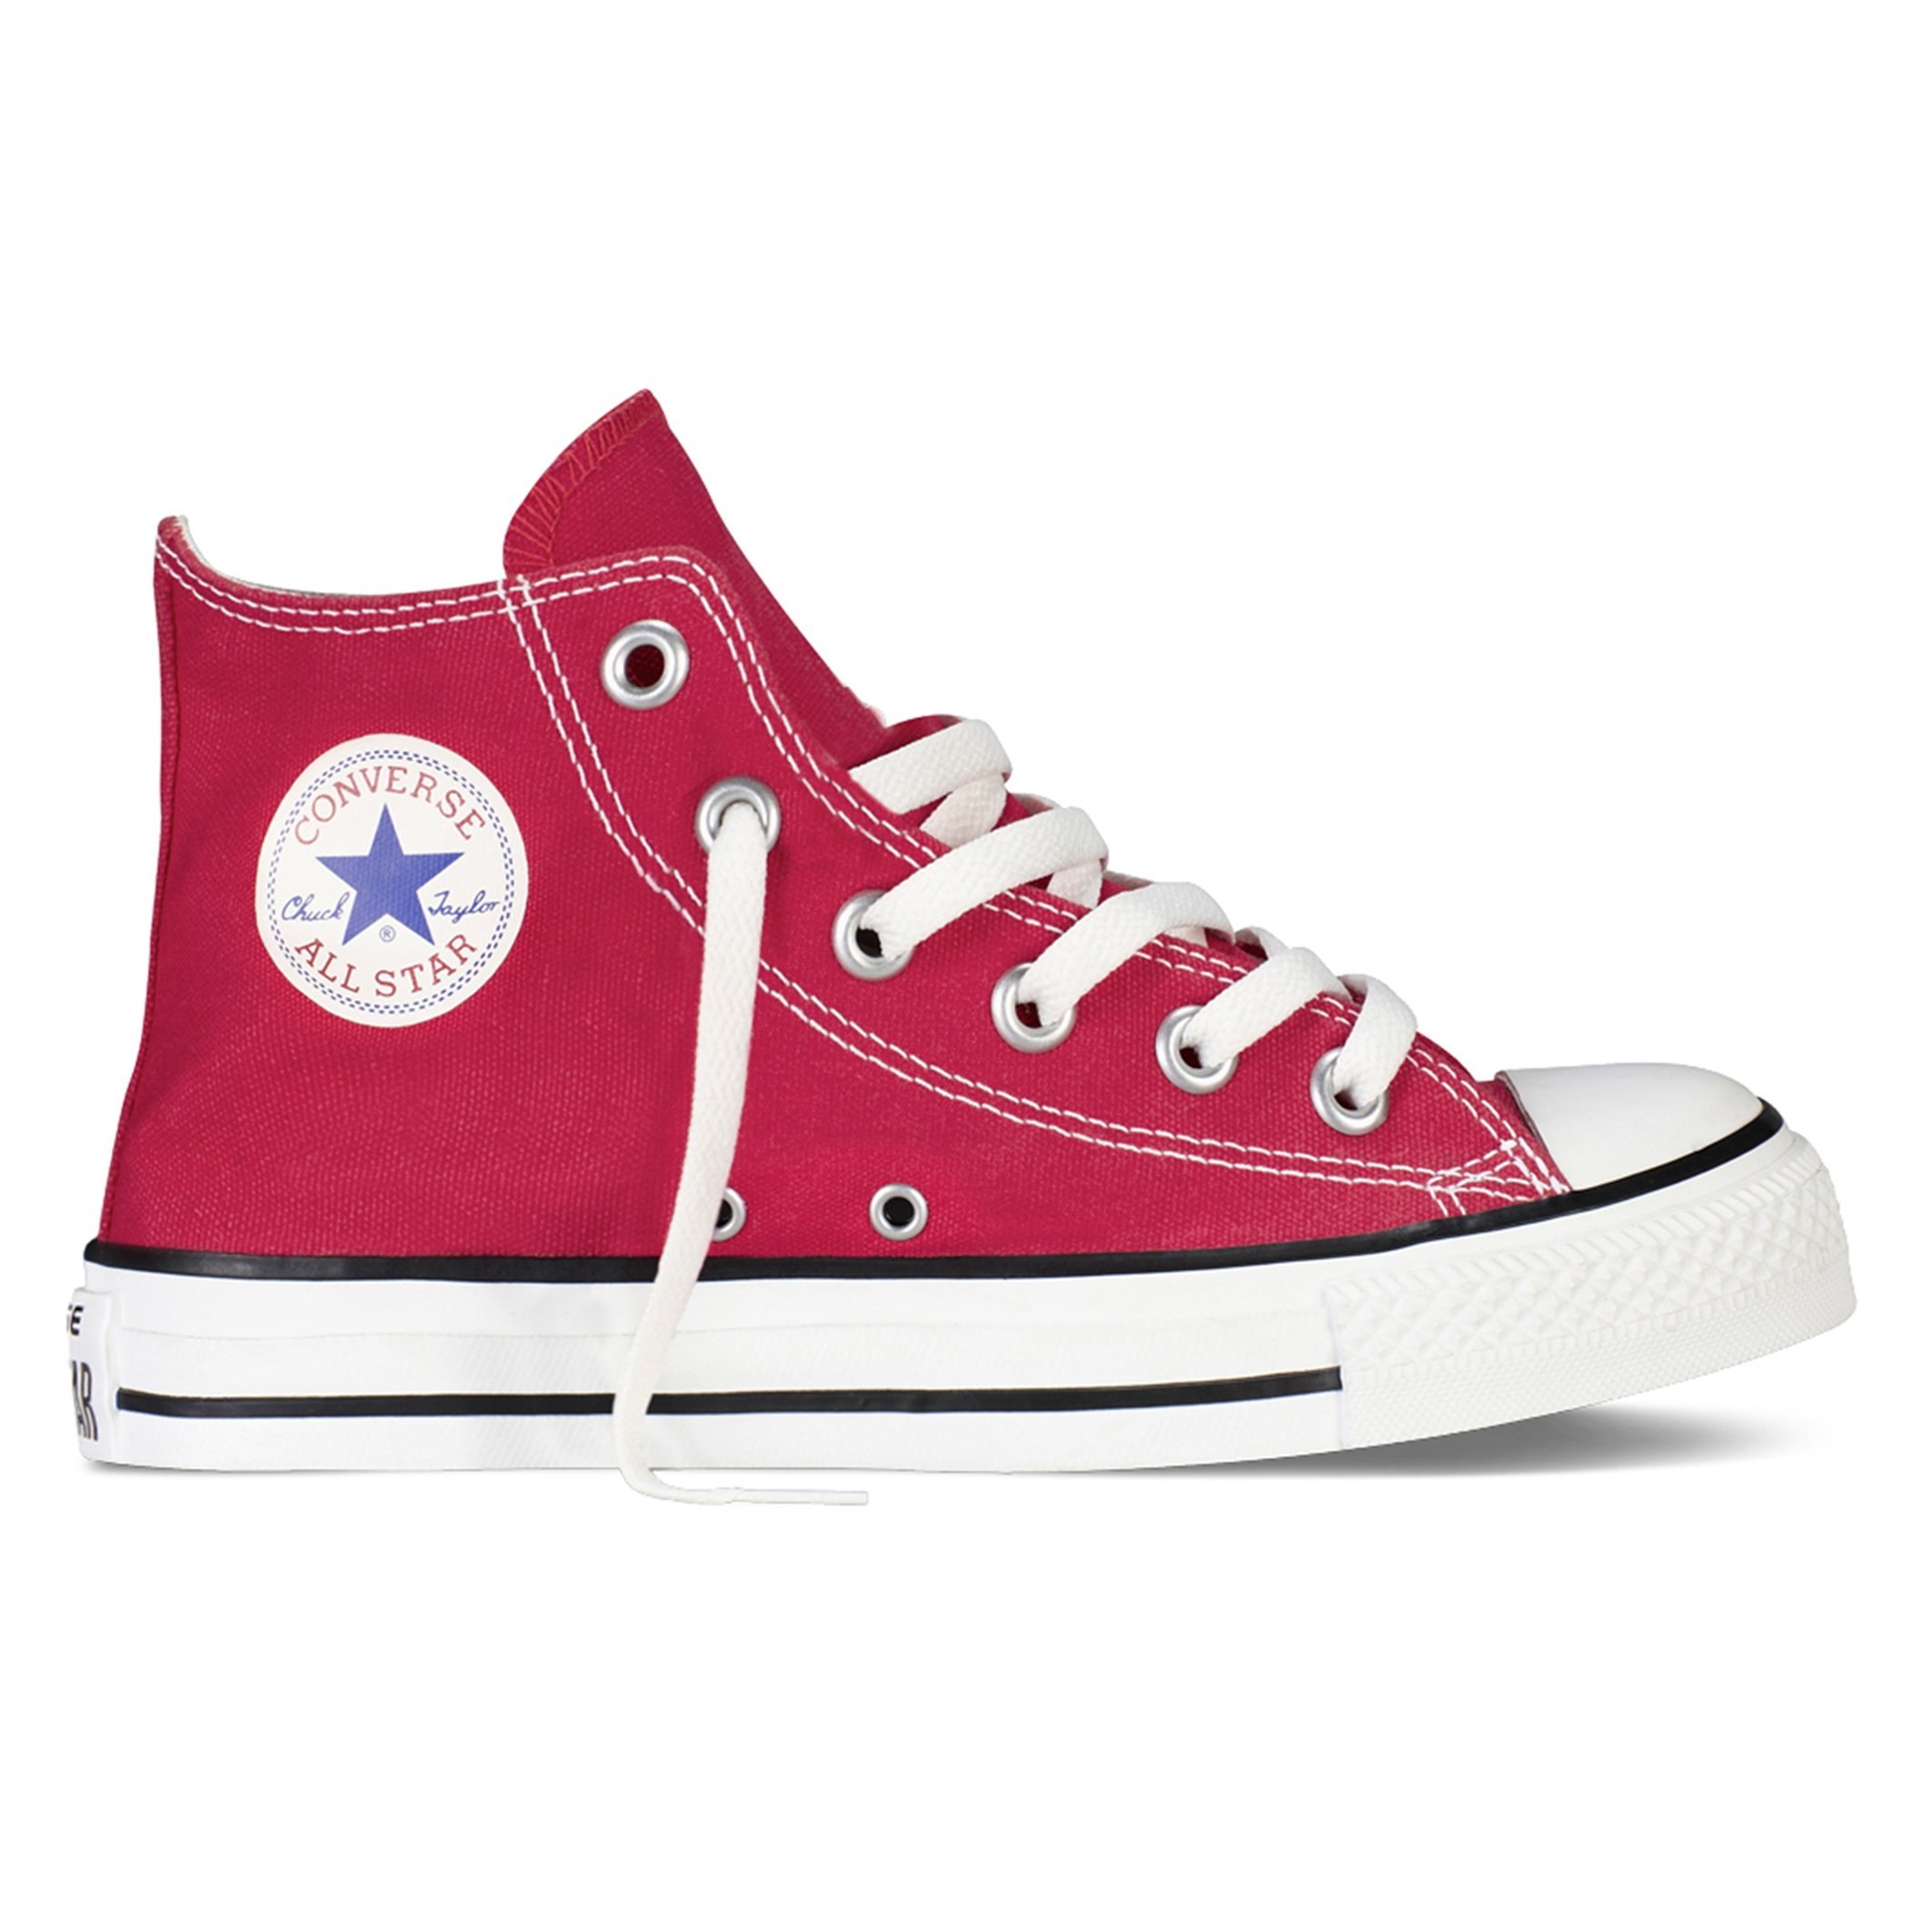 Kids chuck taylor all star core canvas high top trainers, red, Converse |  La Redoute